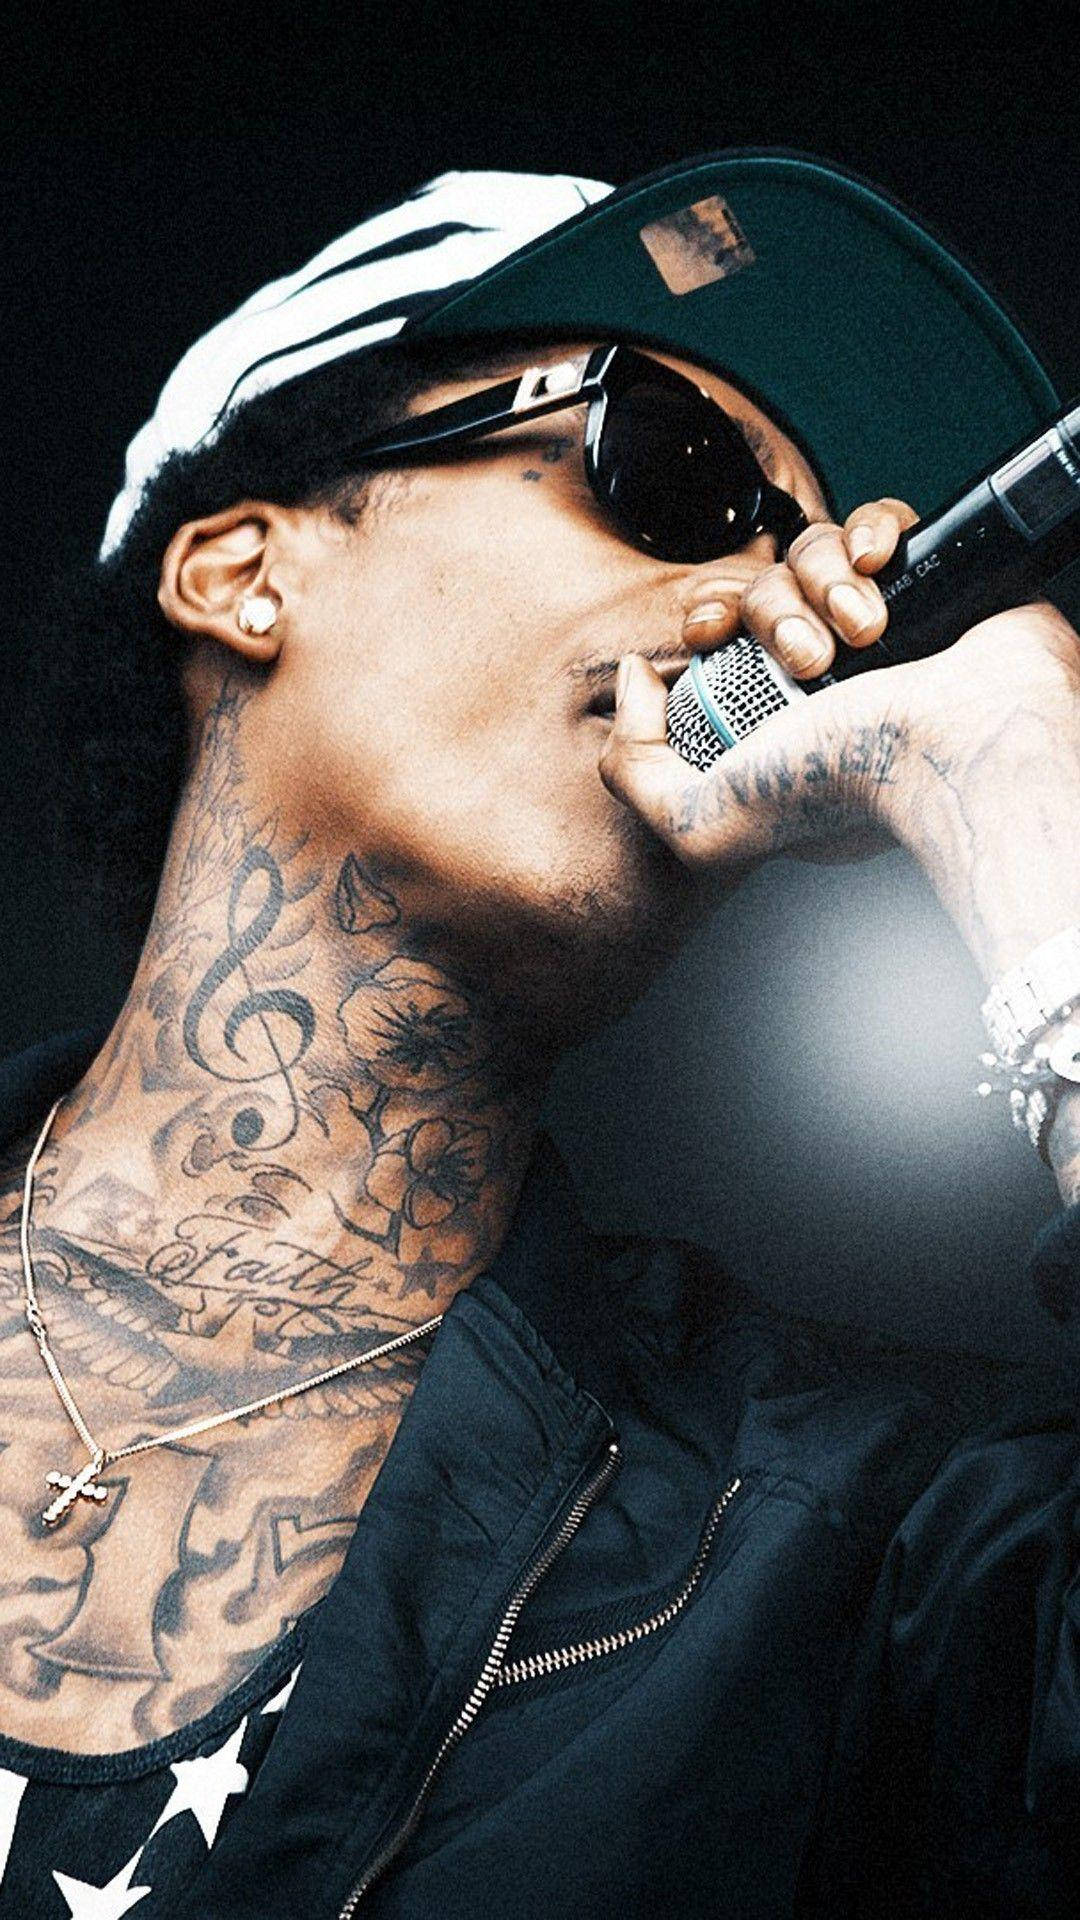 wiz khalifa wallpaper for android